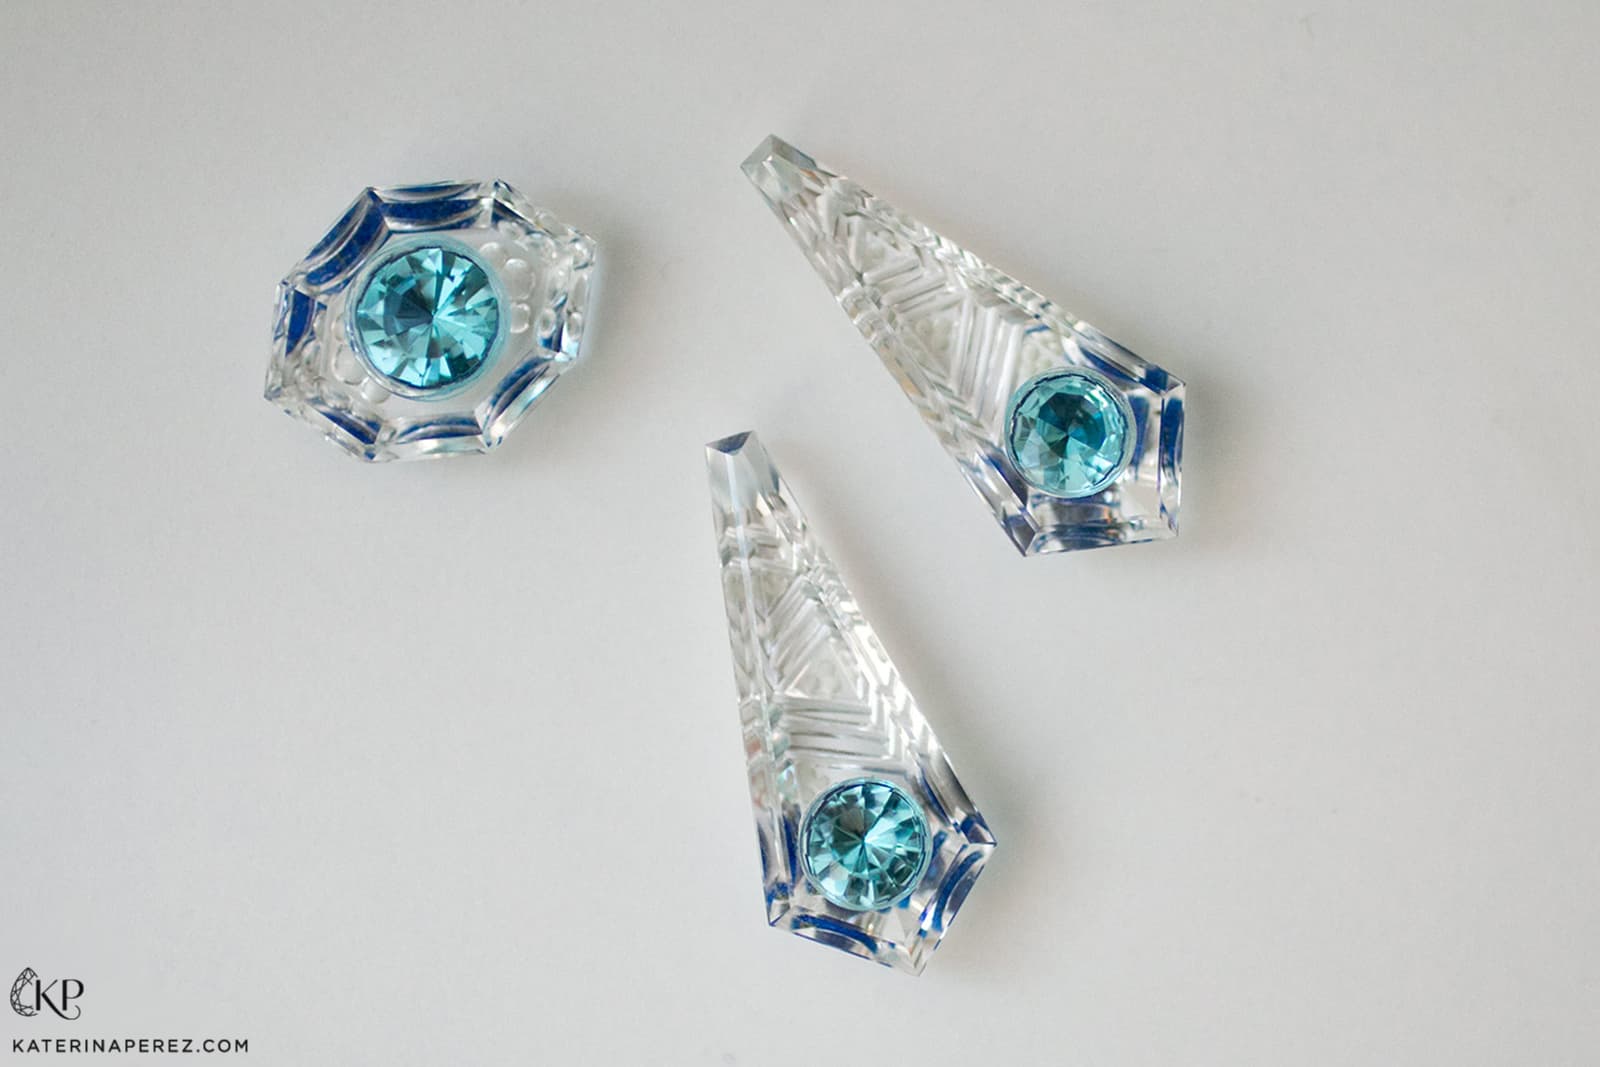 Fredh Jhones pieces in aquamarine and rock crystal